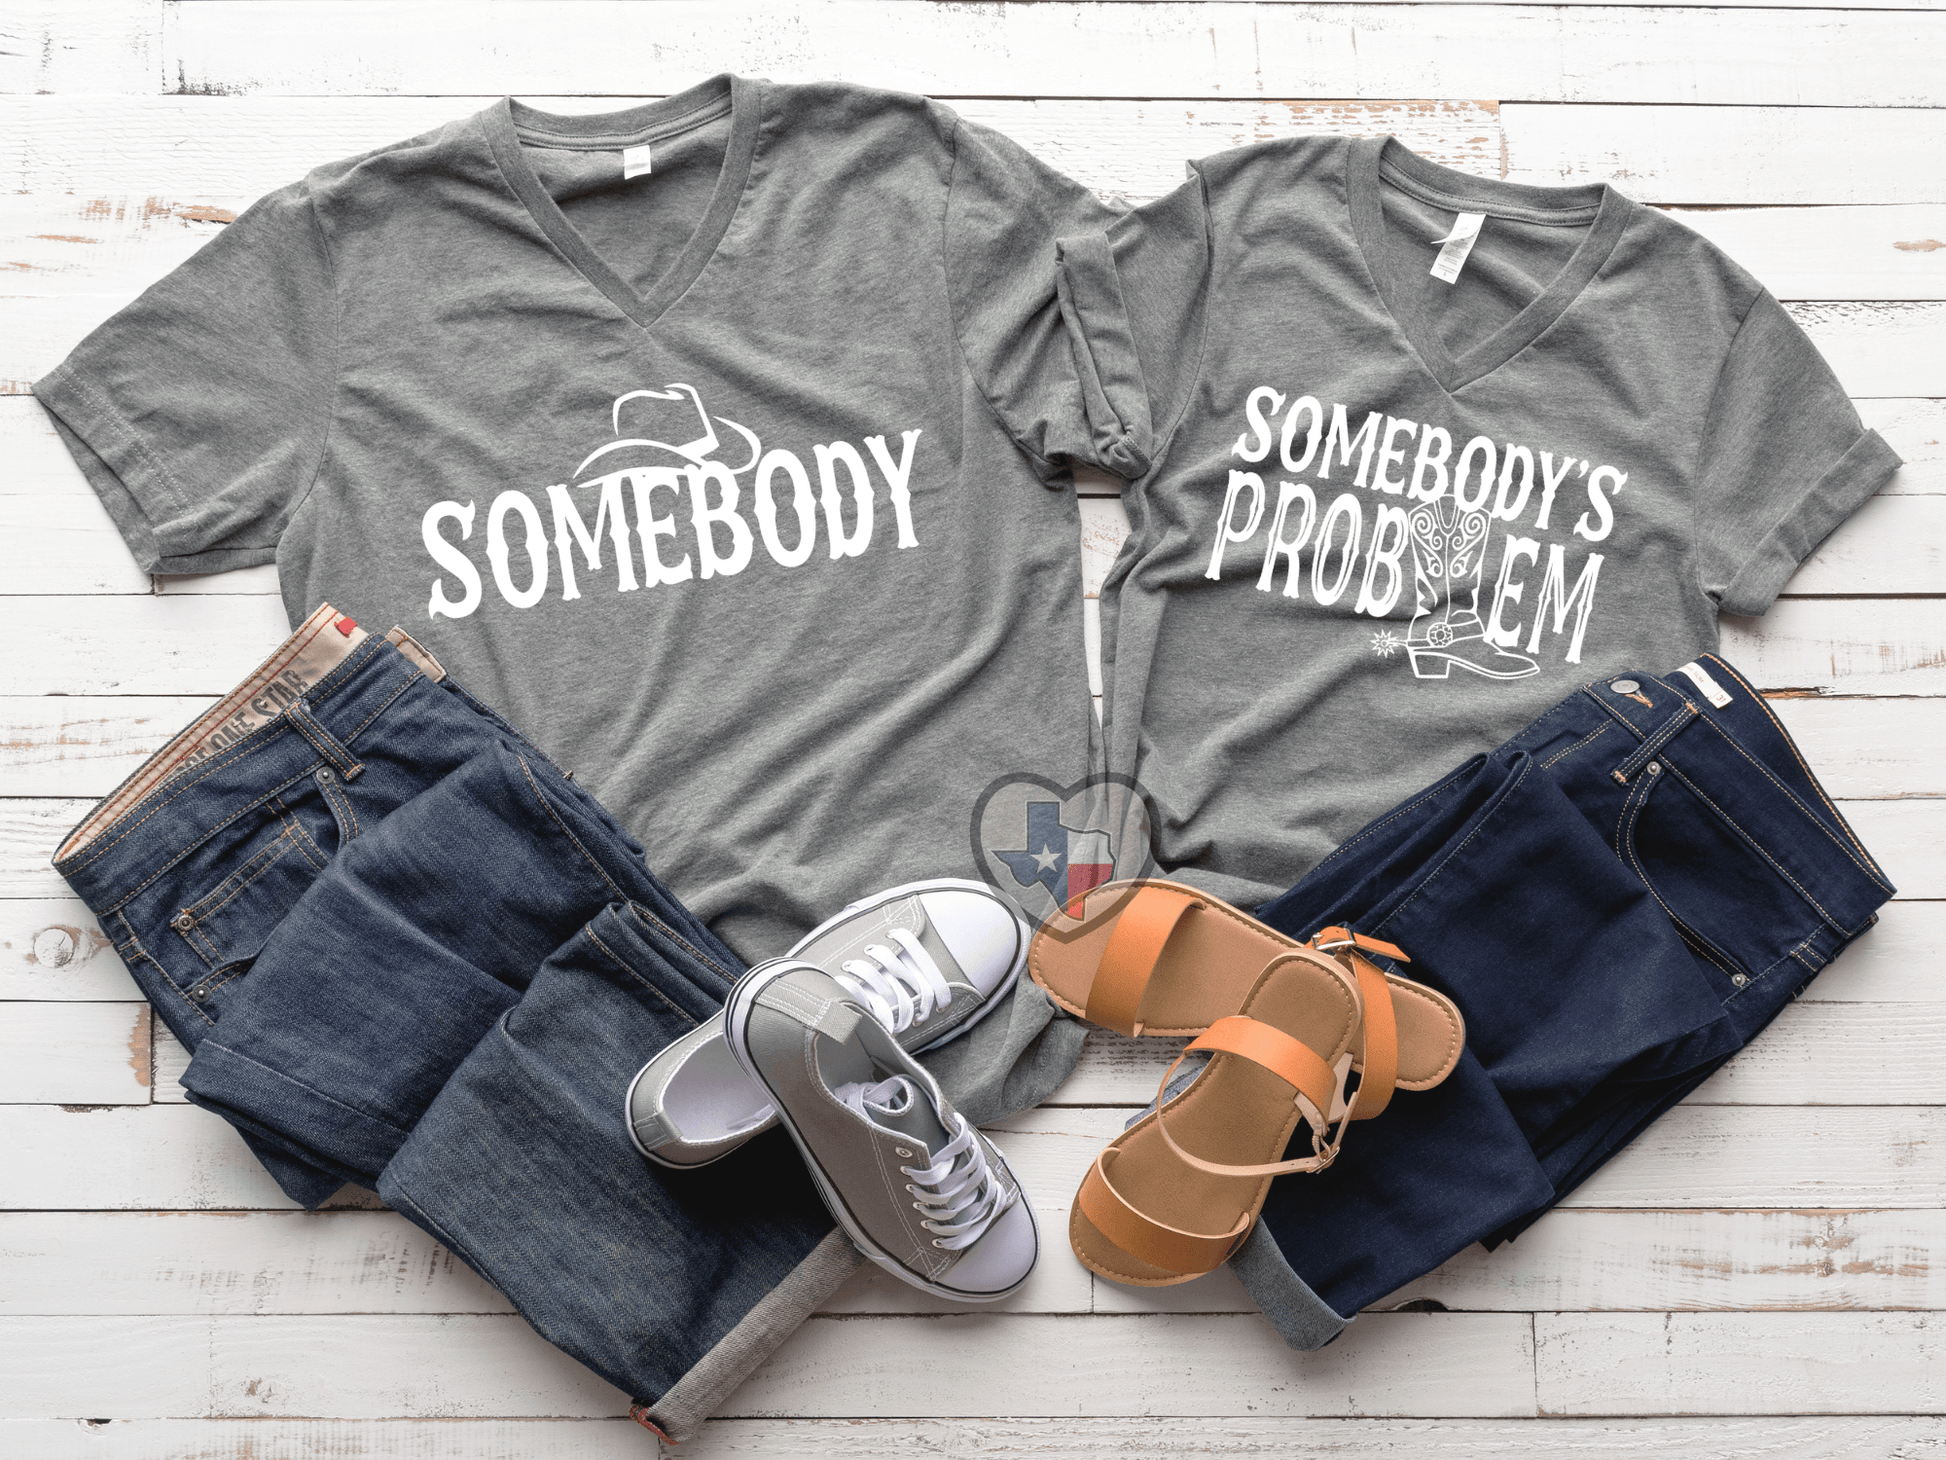 Somebody - Texas Transfers and Designs